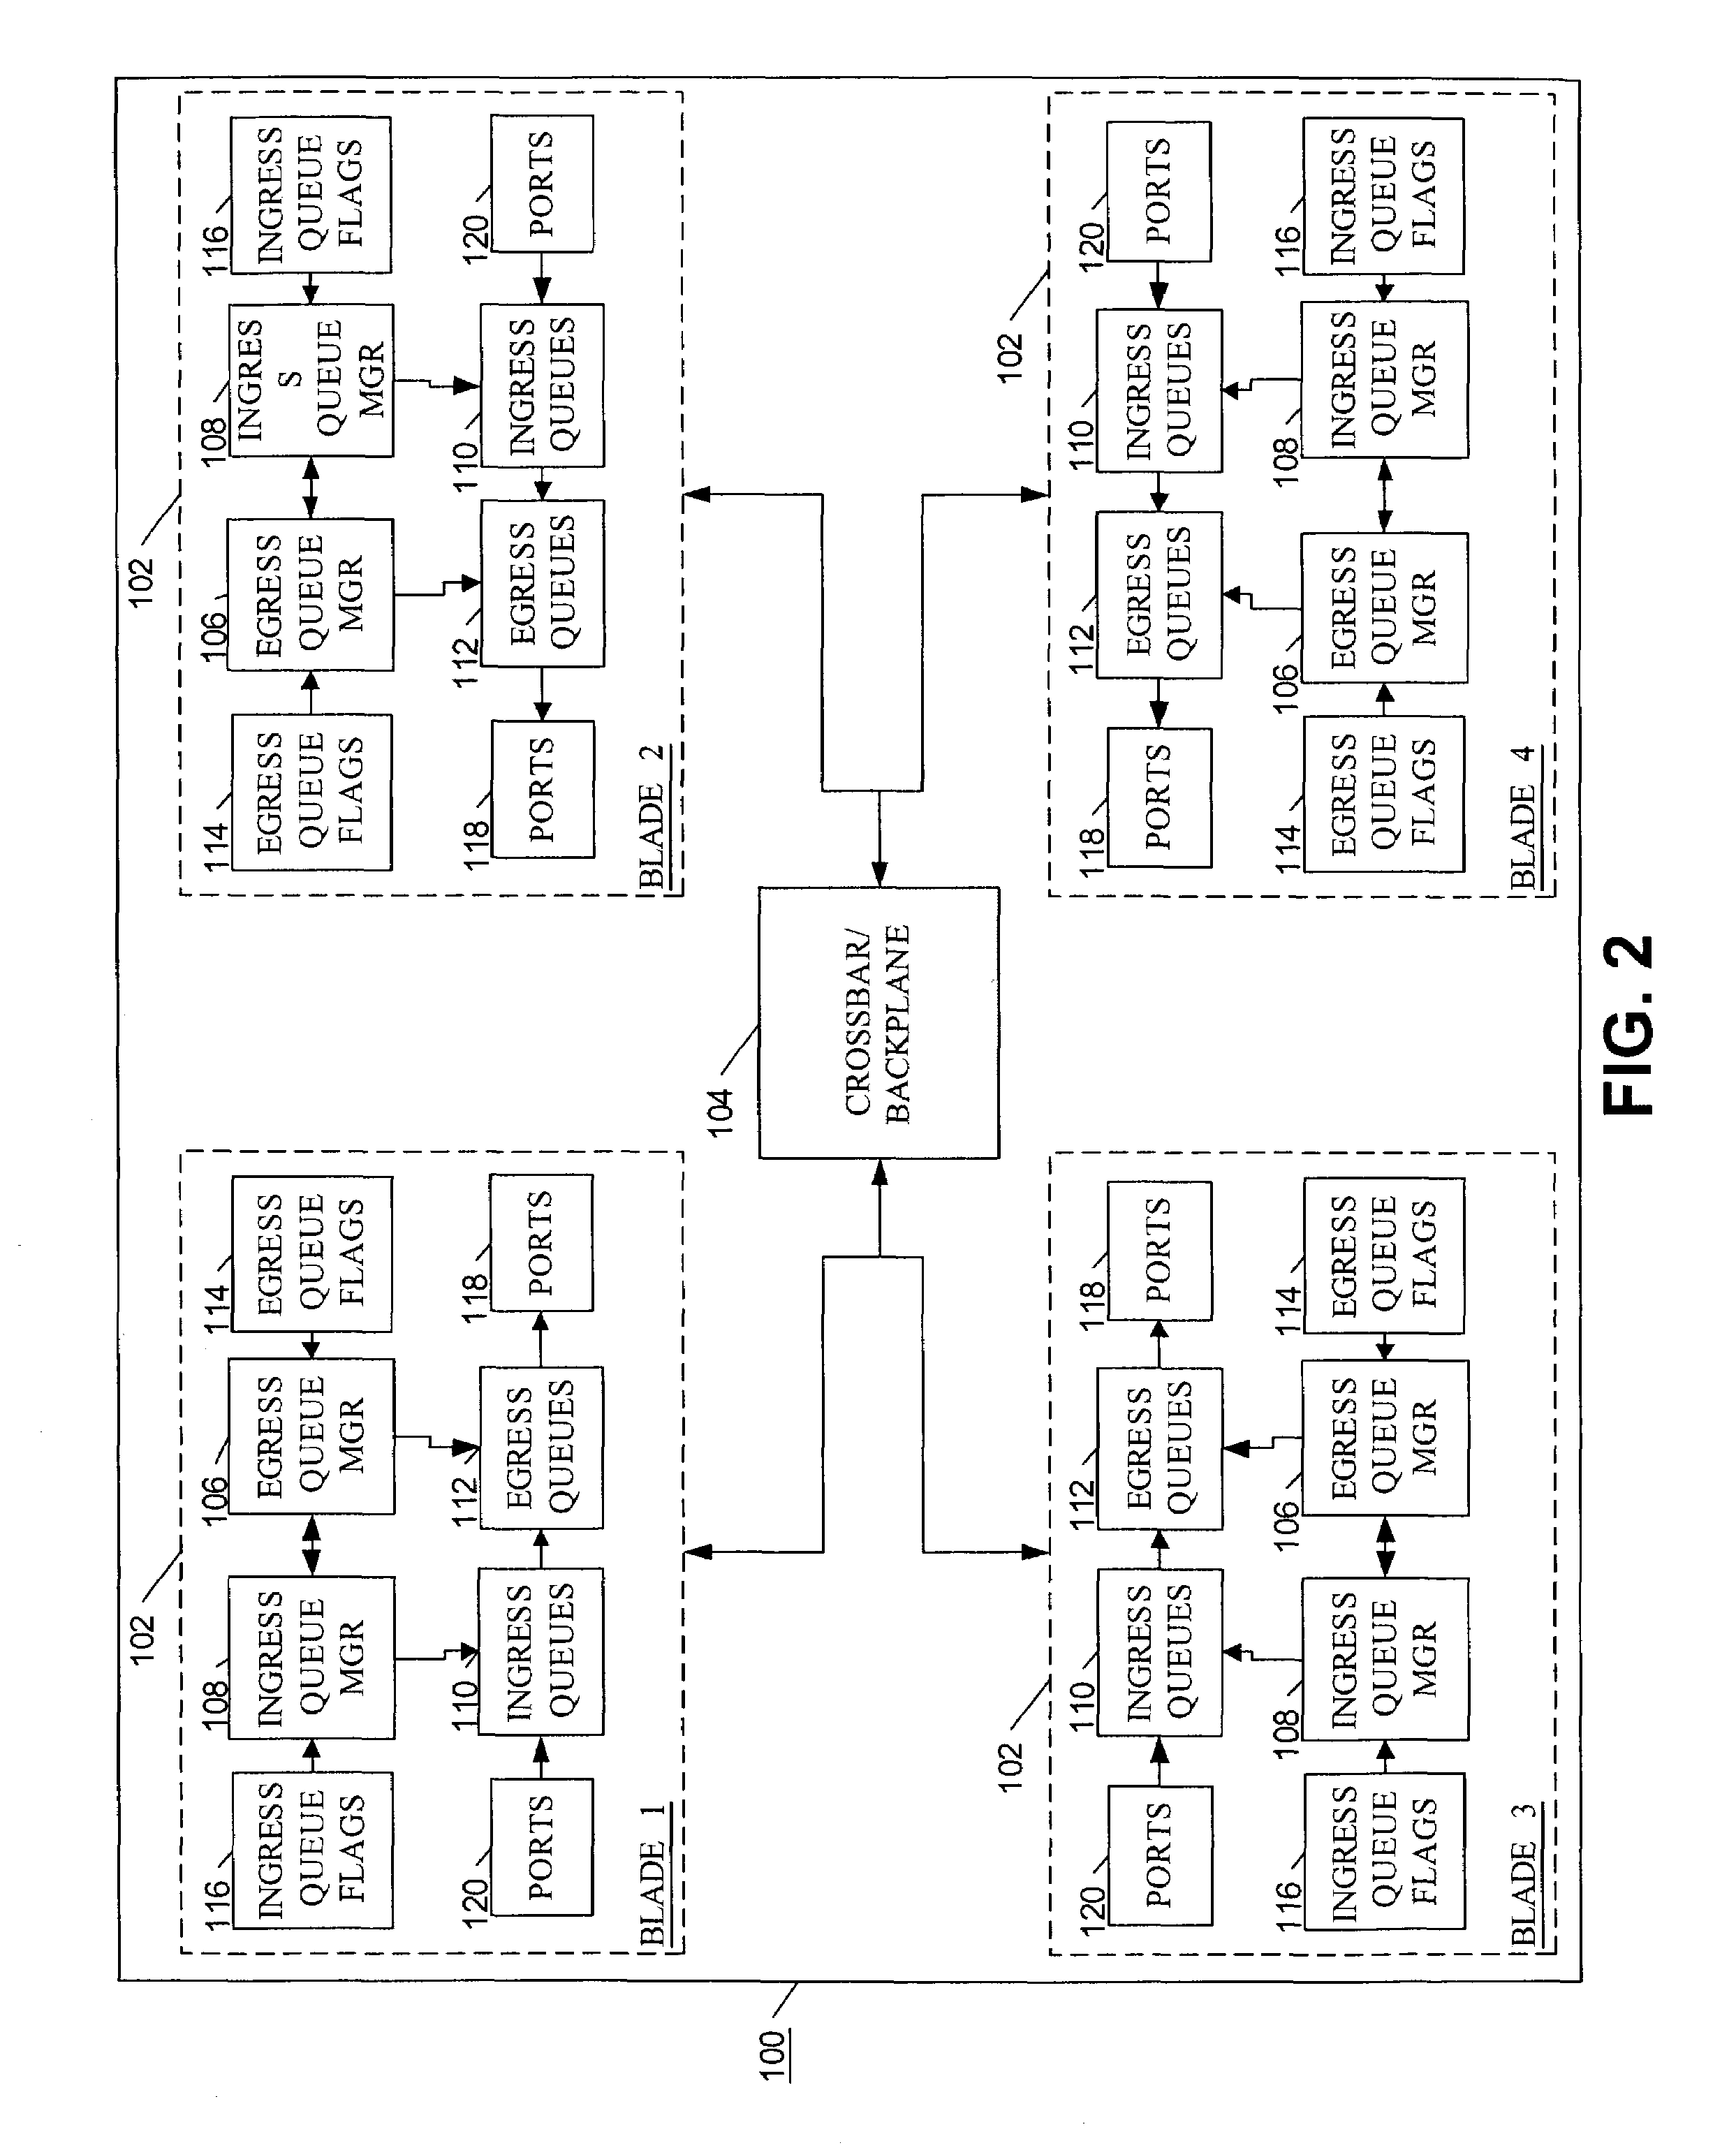 Method and apparatus for providing quality of service across a switched backplane for multicast packets